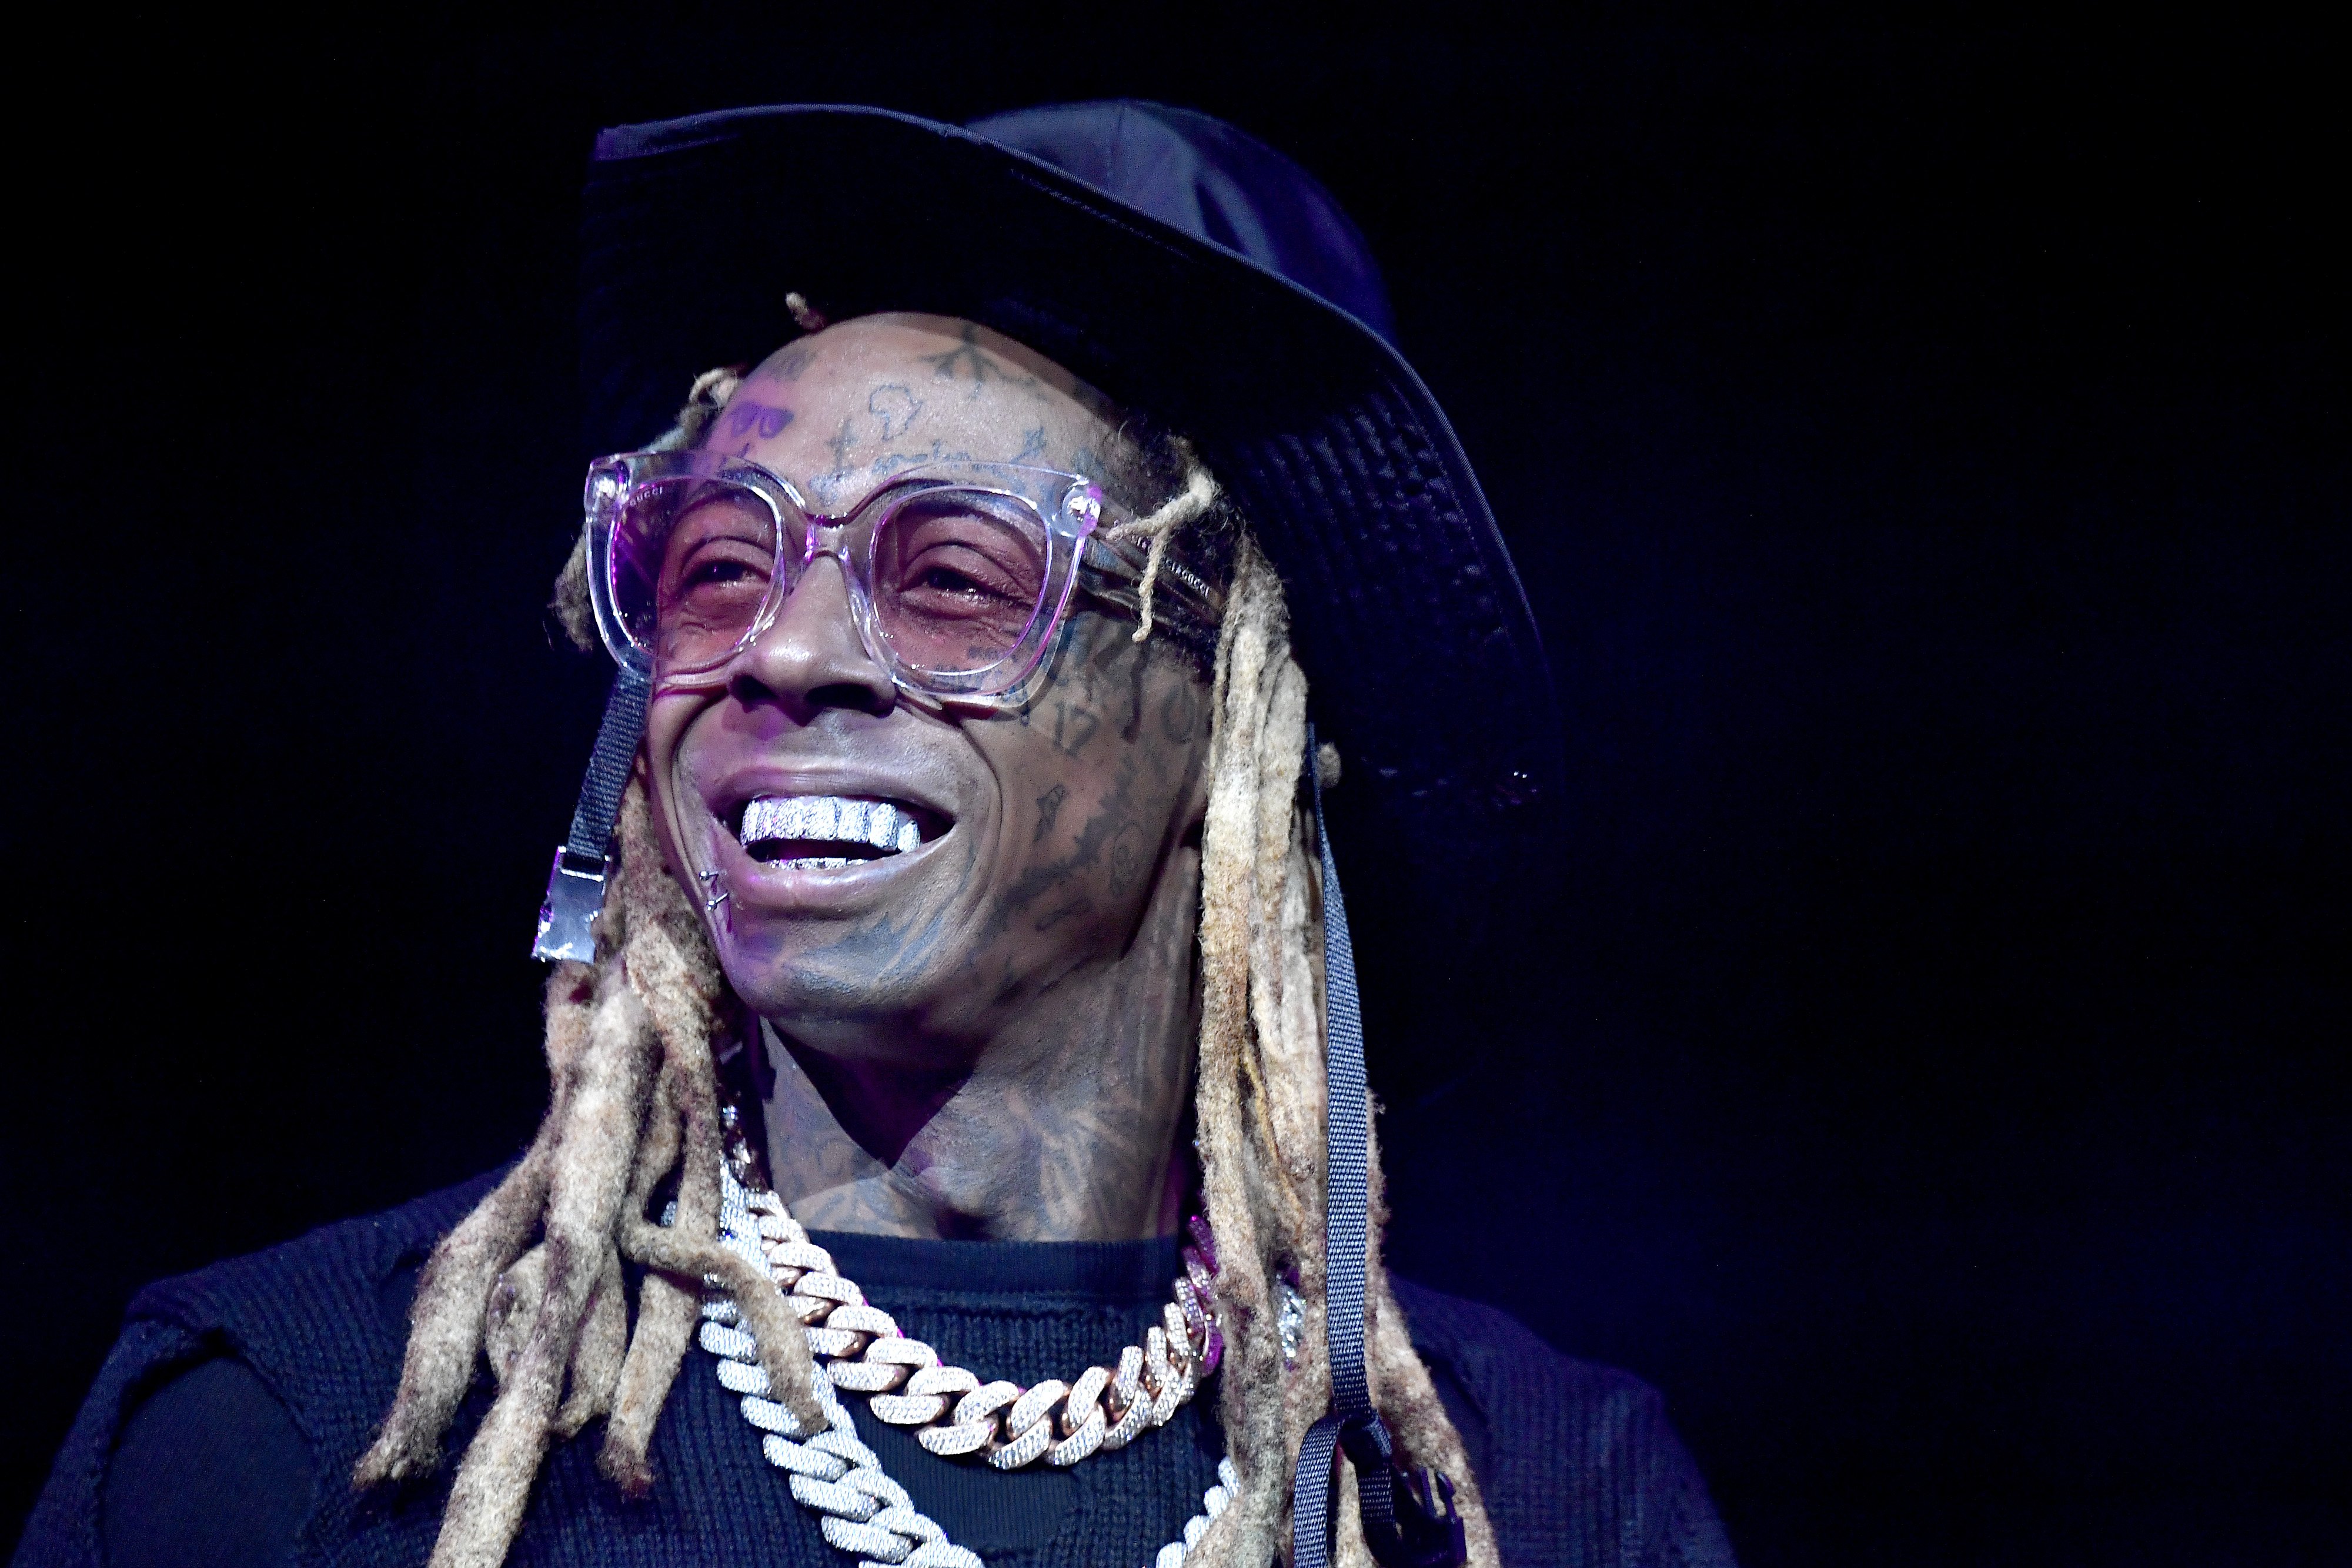 Lil Wayne at the EA Sports Bowl at Bud Light Super Bowl Music Fest on January 30, 2020, in Miami, Florida. | Source: Getty Images